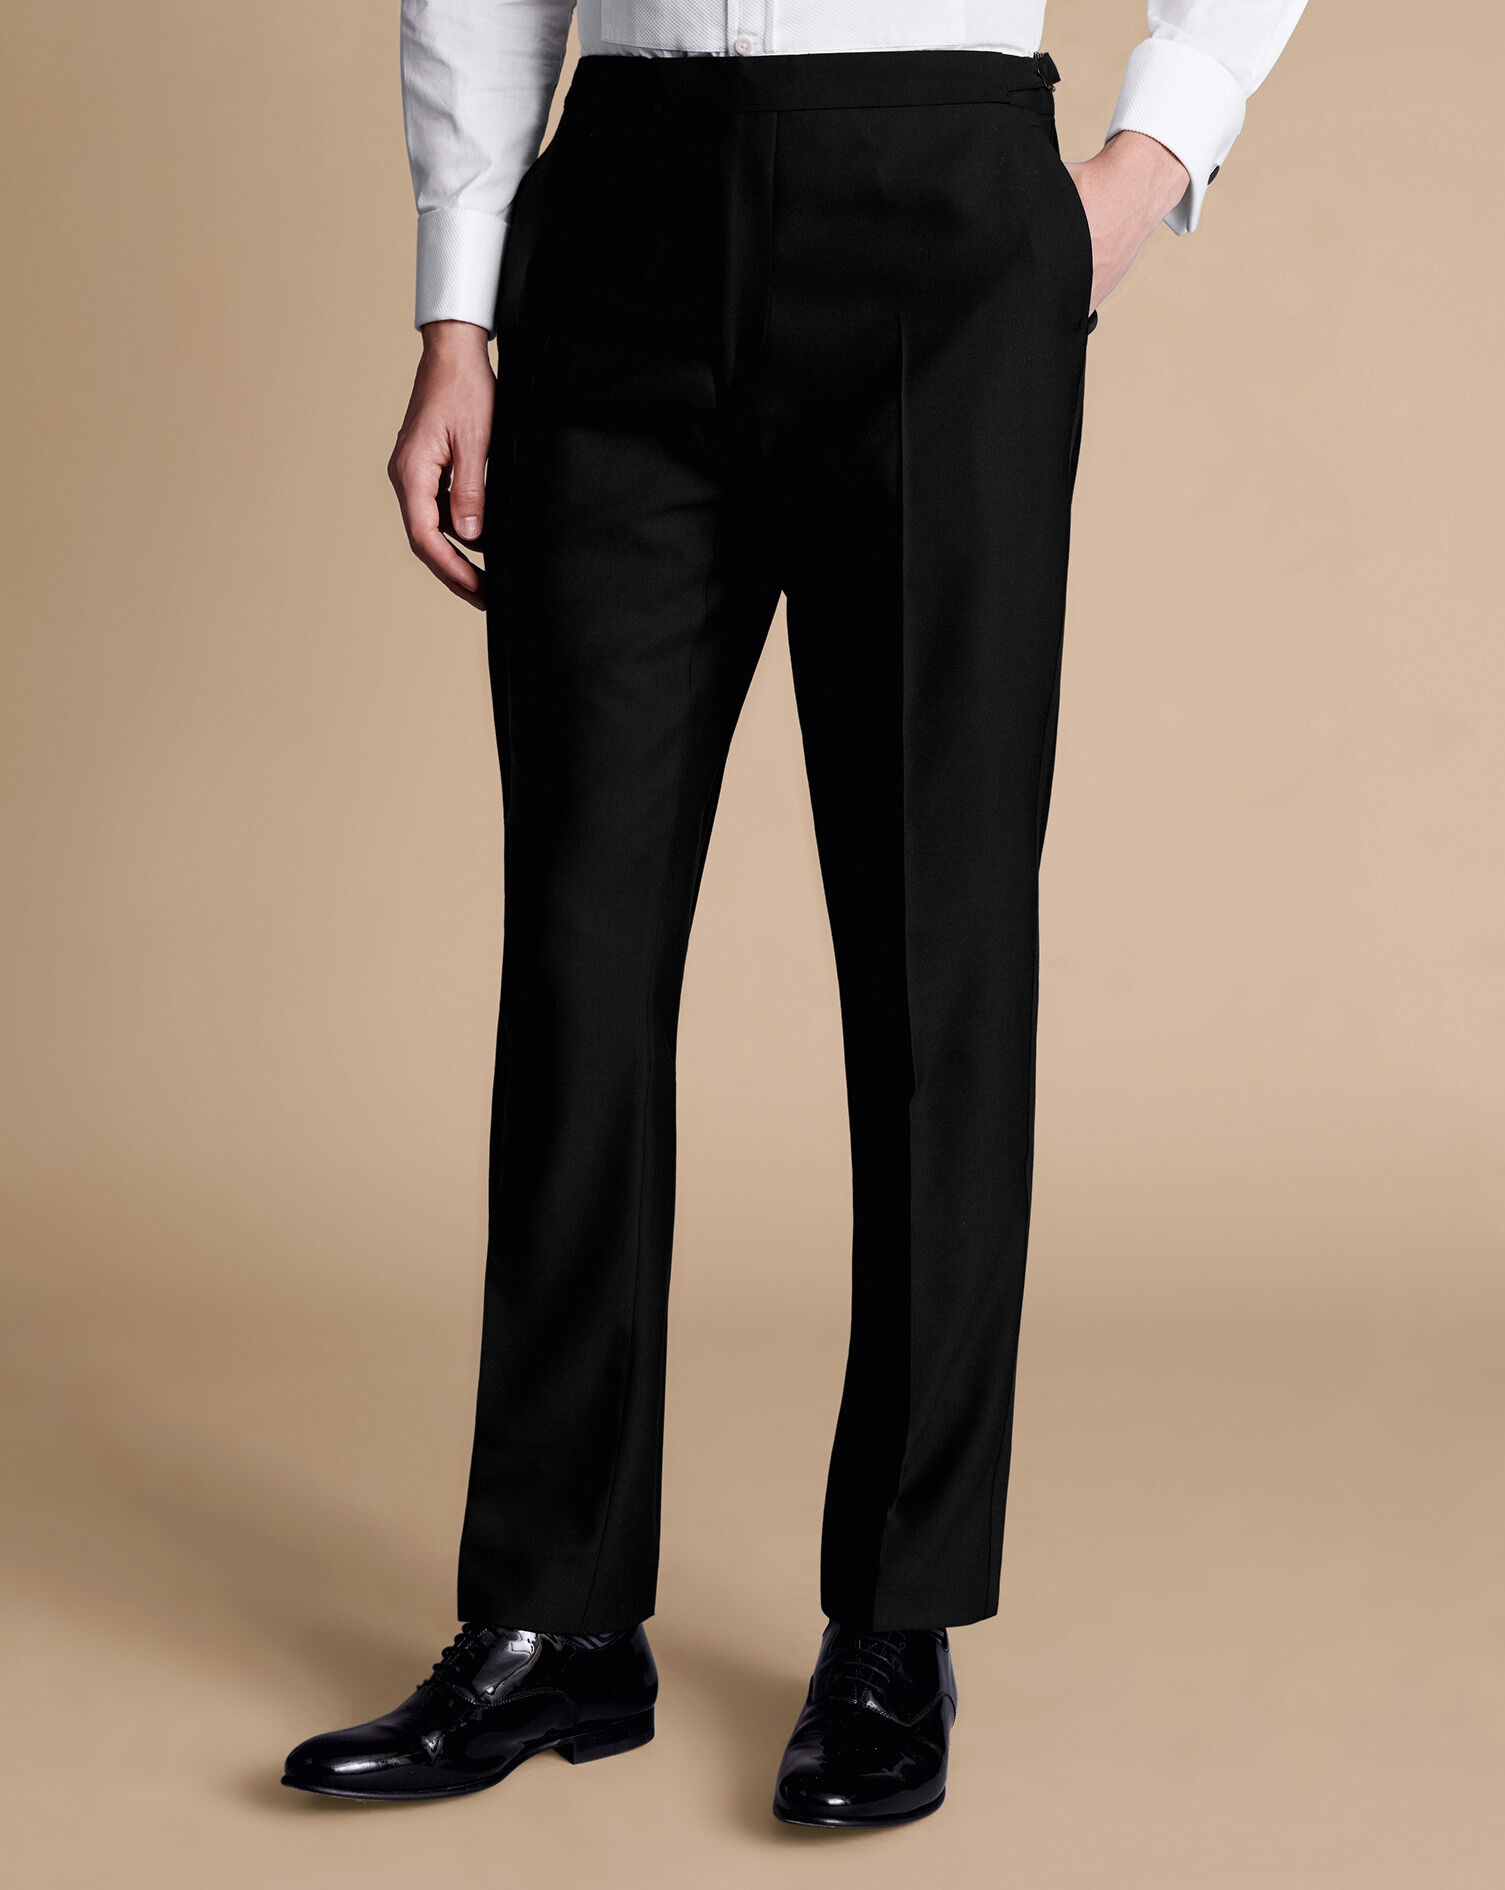 Paul Andrew | Harry Black 2 Piece Dinner Suit Package with Free Shirt Bow  Tie & Hankie - MENSWEARR